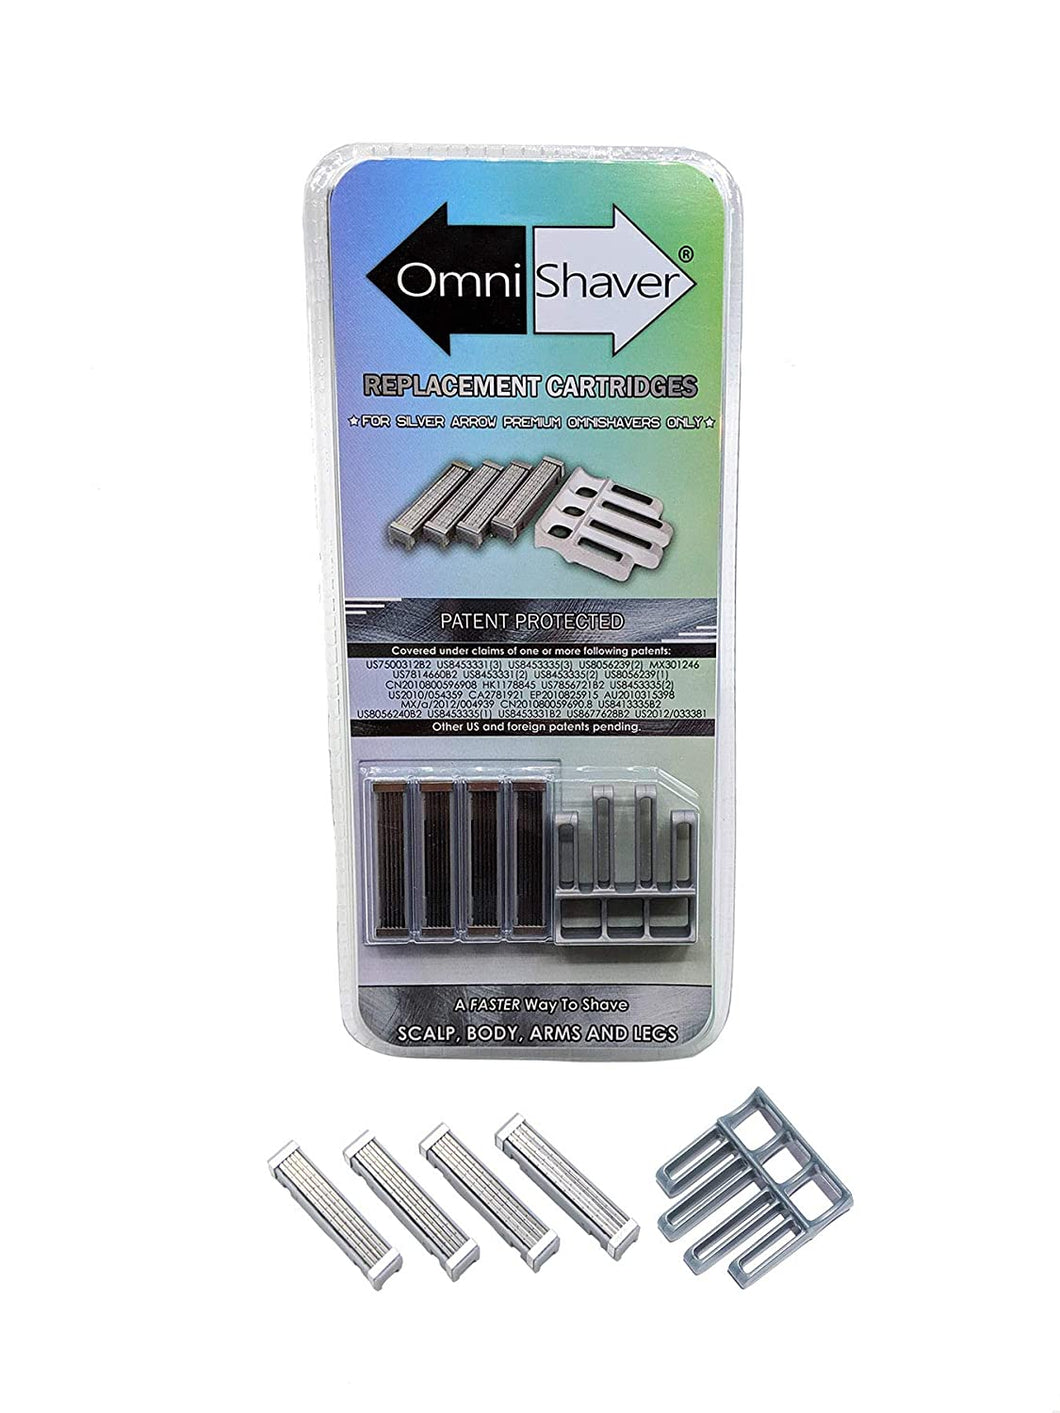 Premium Omnishaver Replacement Cartridge Refill Kit with One Blade Removal Tool - An Alternative to Disposable, Self Cleans & Strops During Use - Durable Smooth & Comfortable 4 Cartridges